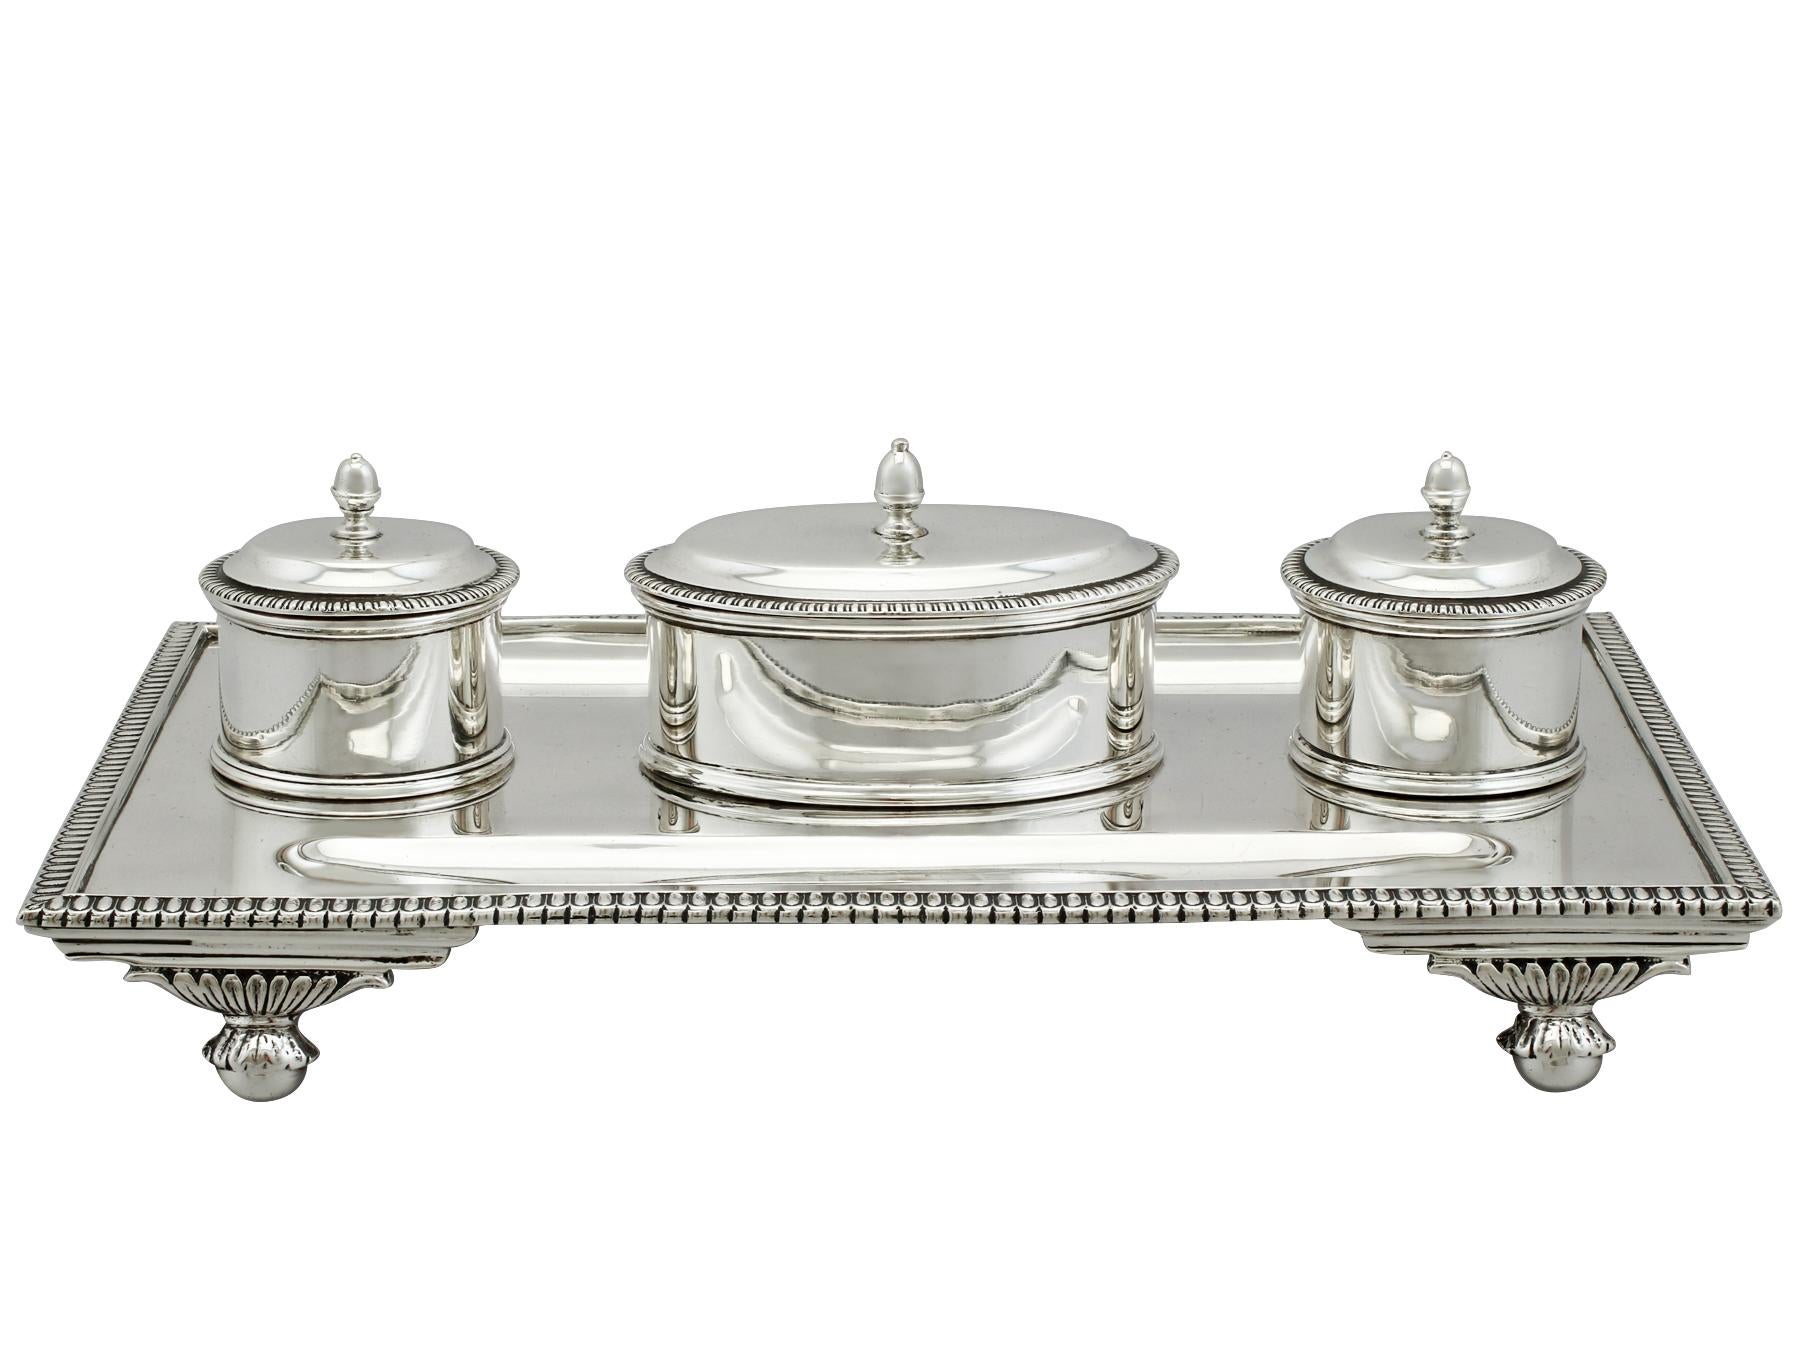 An exceptional, fine and impressive antique George V English sterling silver desk Standish; an addition to our ornamental silverware collection.

This exceptional antique silver desk Standish, in sterling standard, has a rectangular form.

This